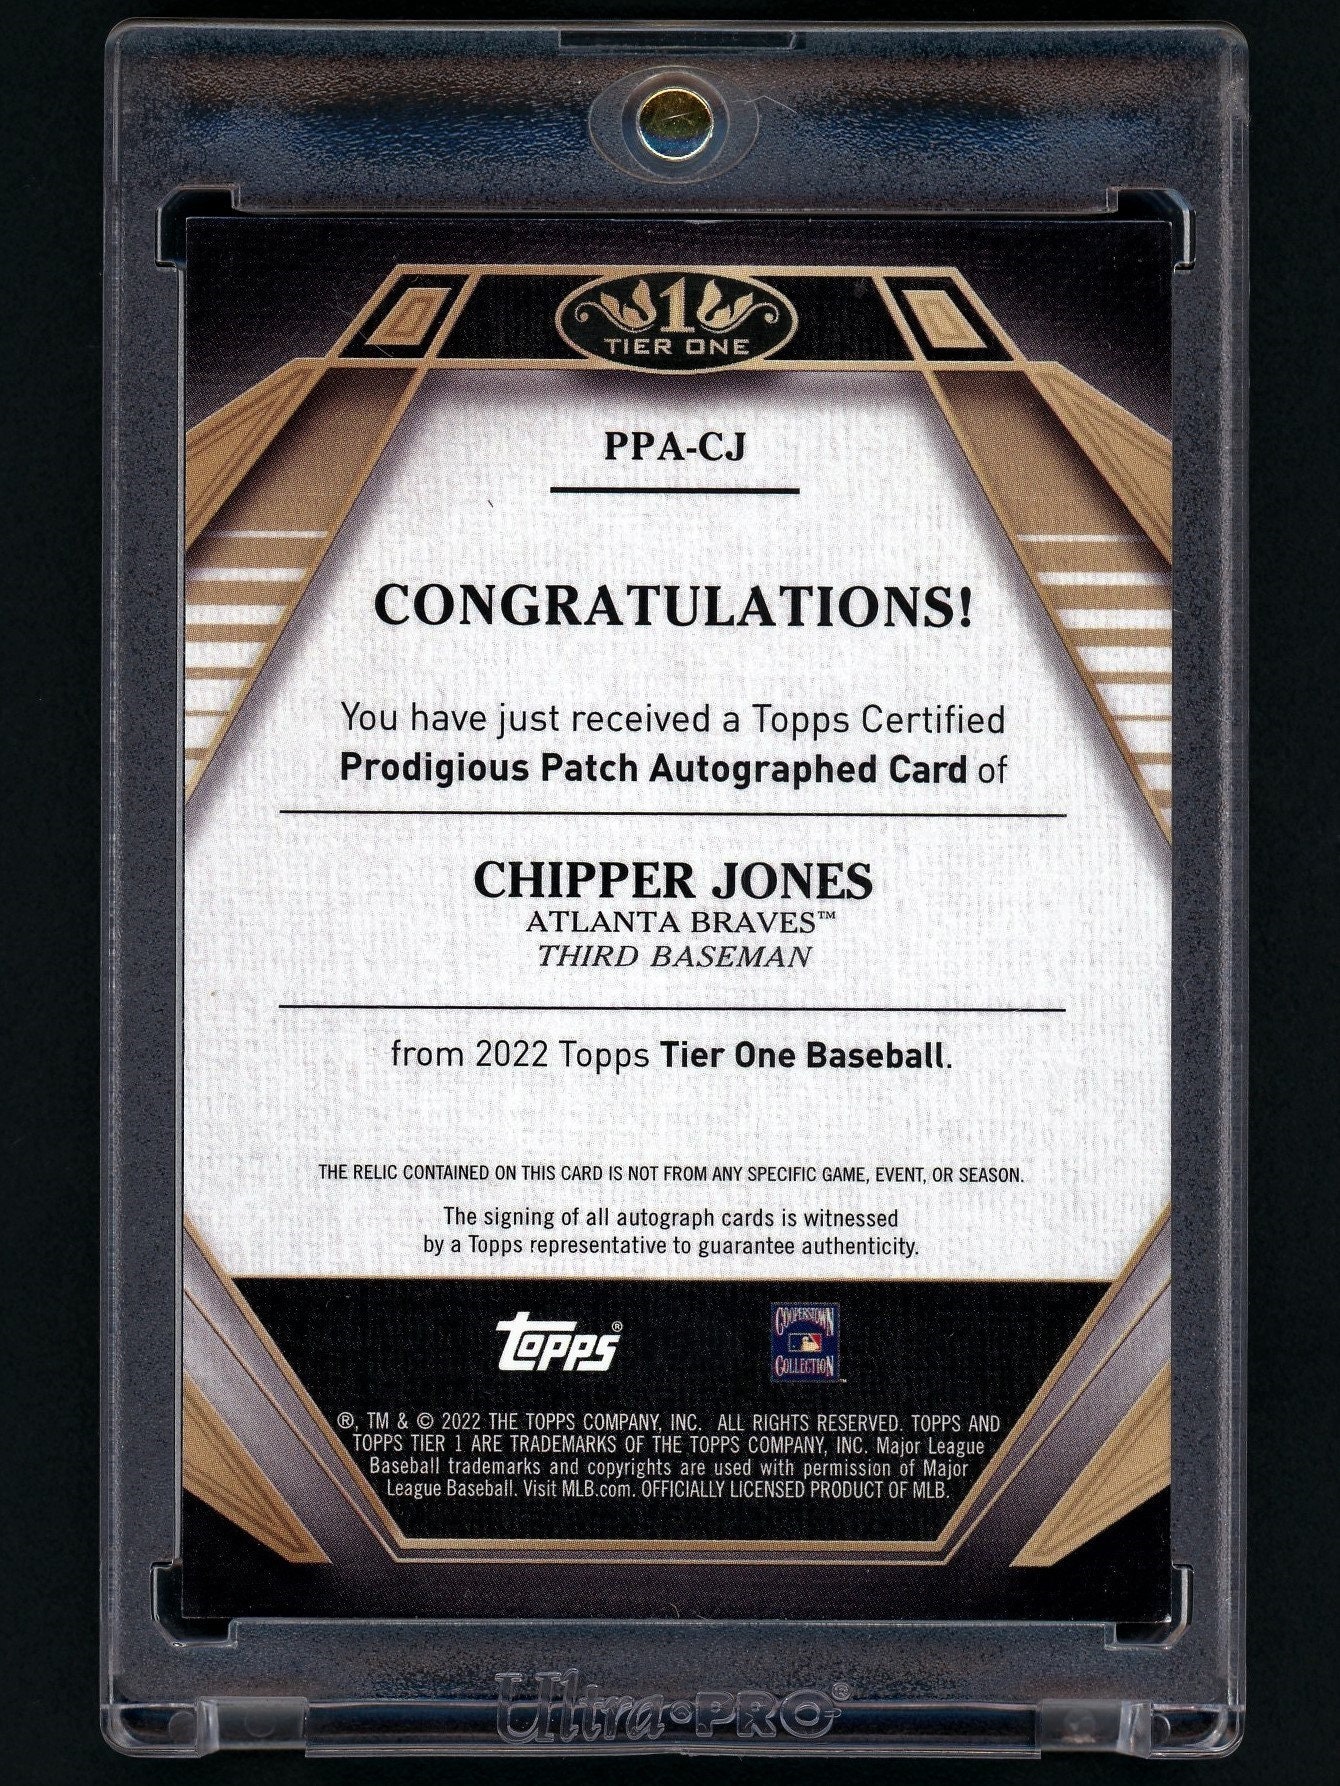 Aaron Judge 2019 Topps Tier One Clear One Baseball Autograph Card 5/5